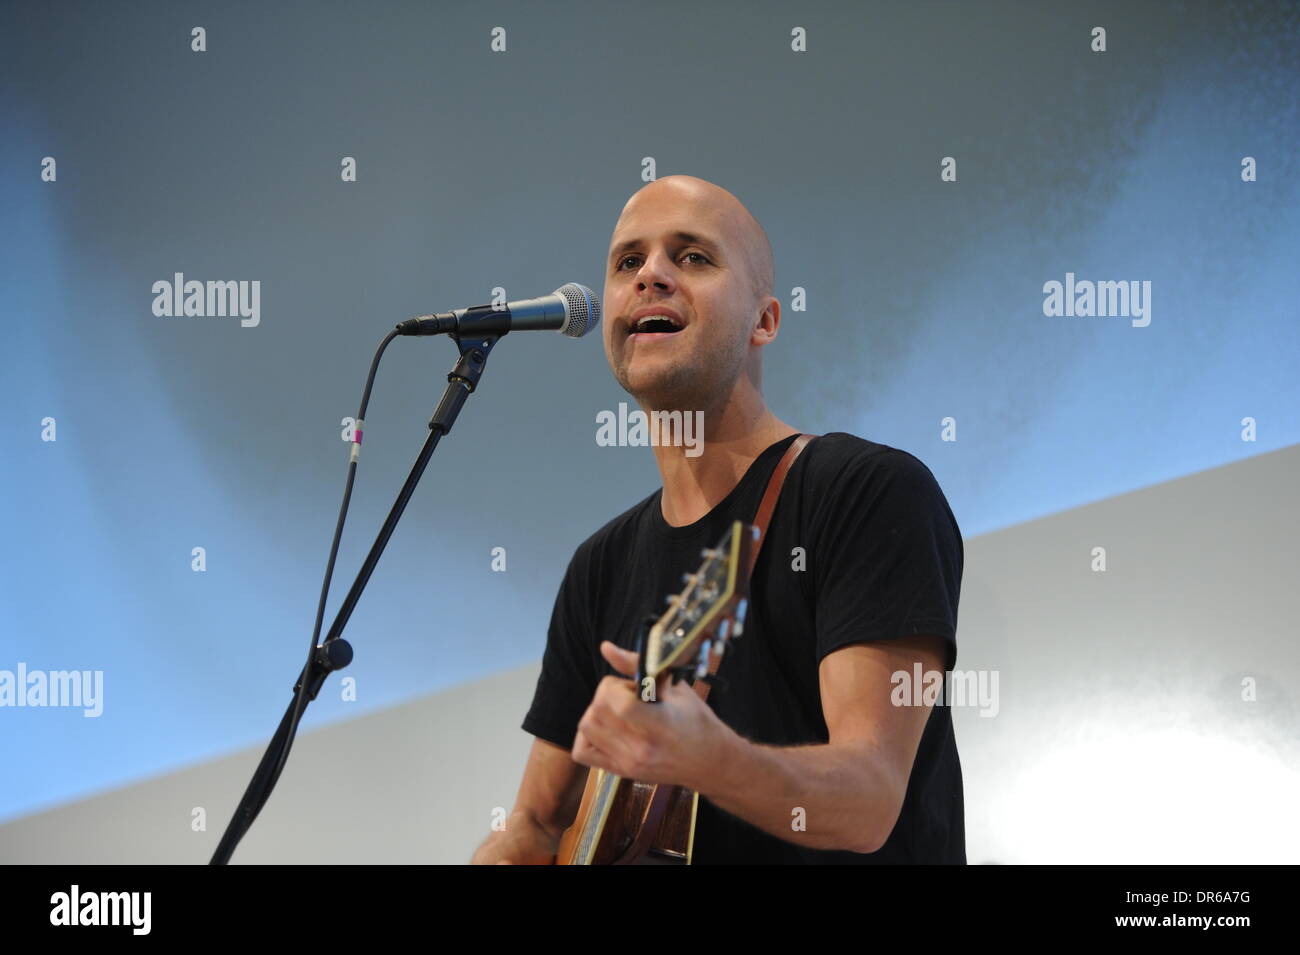 MUNICH/GERMANY - JANUARY 20: Belgian Singer Milow performs during the Digital Life Design (DLD) Conference at the HVB Forum on January 20, 2014 in Munich, Germany. DLD is a global network on innovation, digitization, science and culture which connects business, creative and social leaders, opinion-formers and influencers for crossover conversation and inspiration. (Photo: picture alliance / Jan Haas) Stock Photo